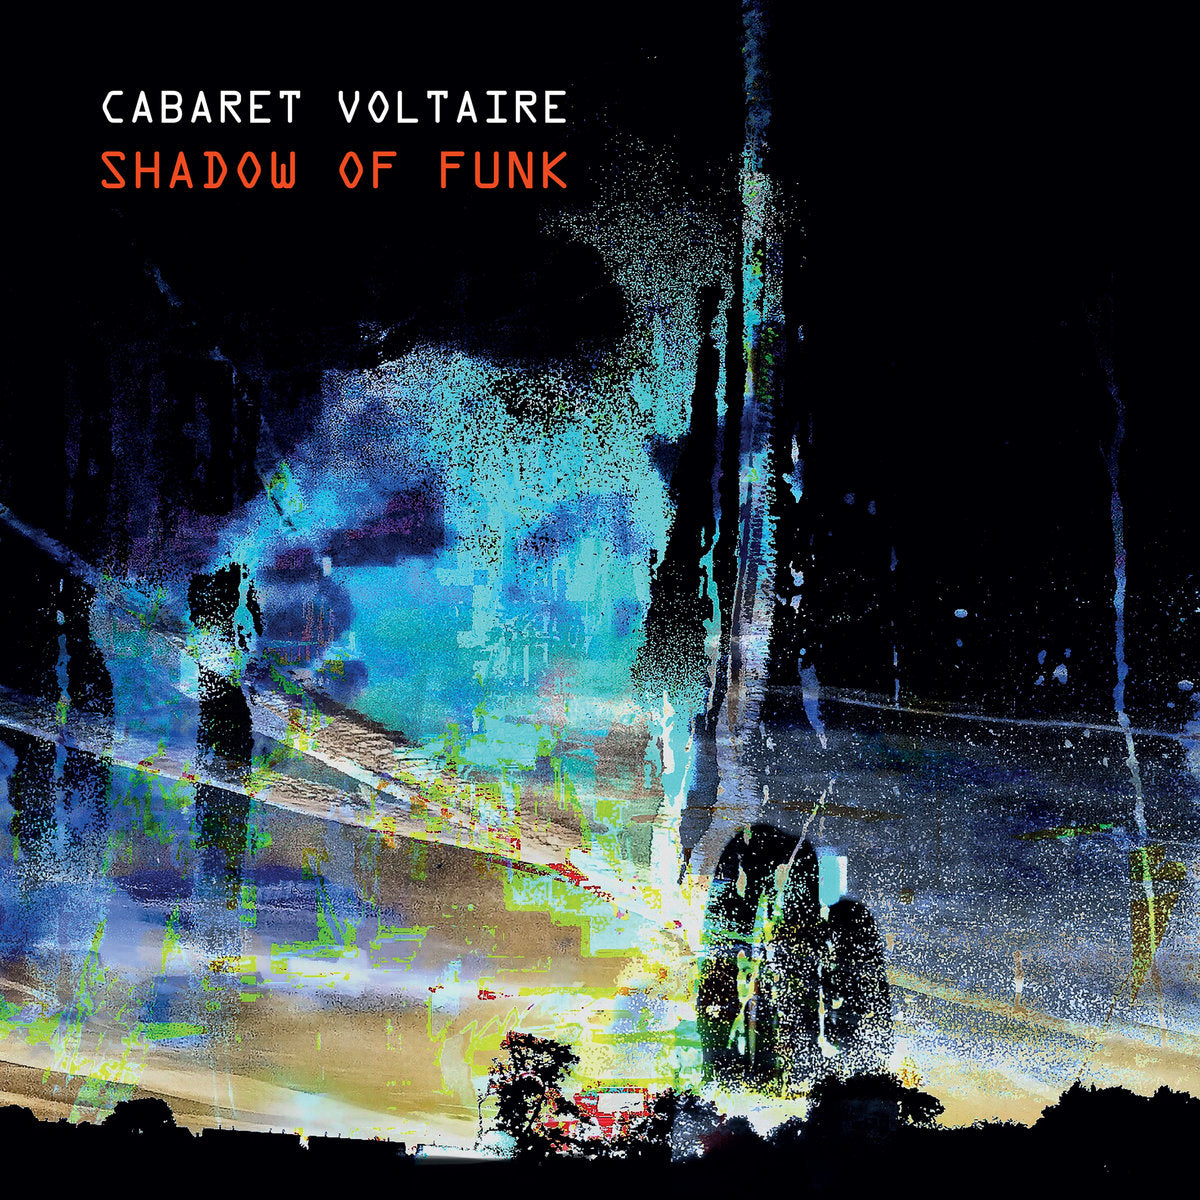 CABARET VOLTAIRE - Shadow of Funk [EP] - 12" - Curacao Coloured Vinyl